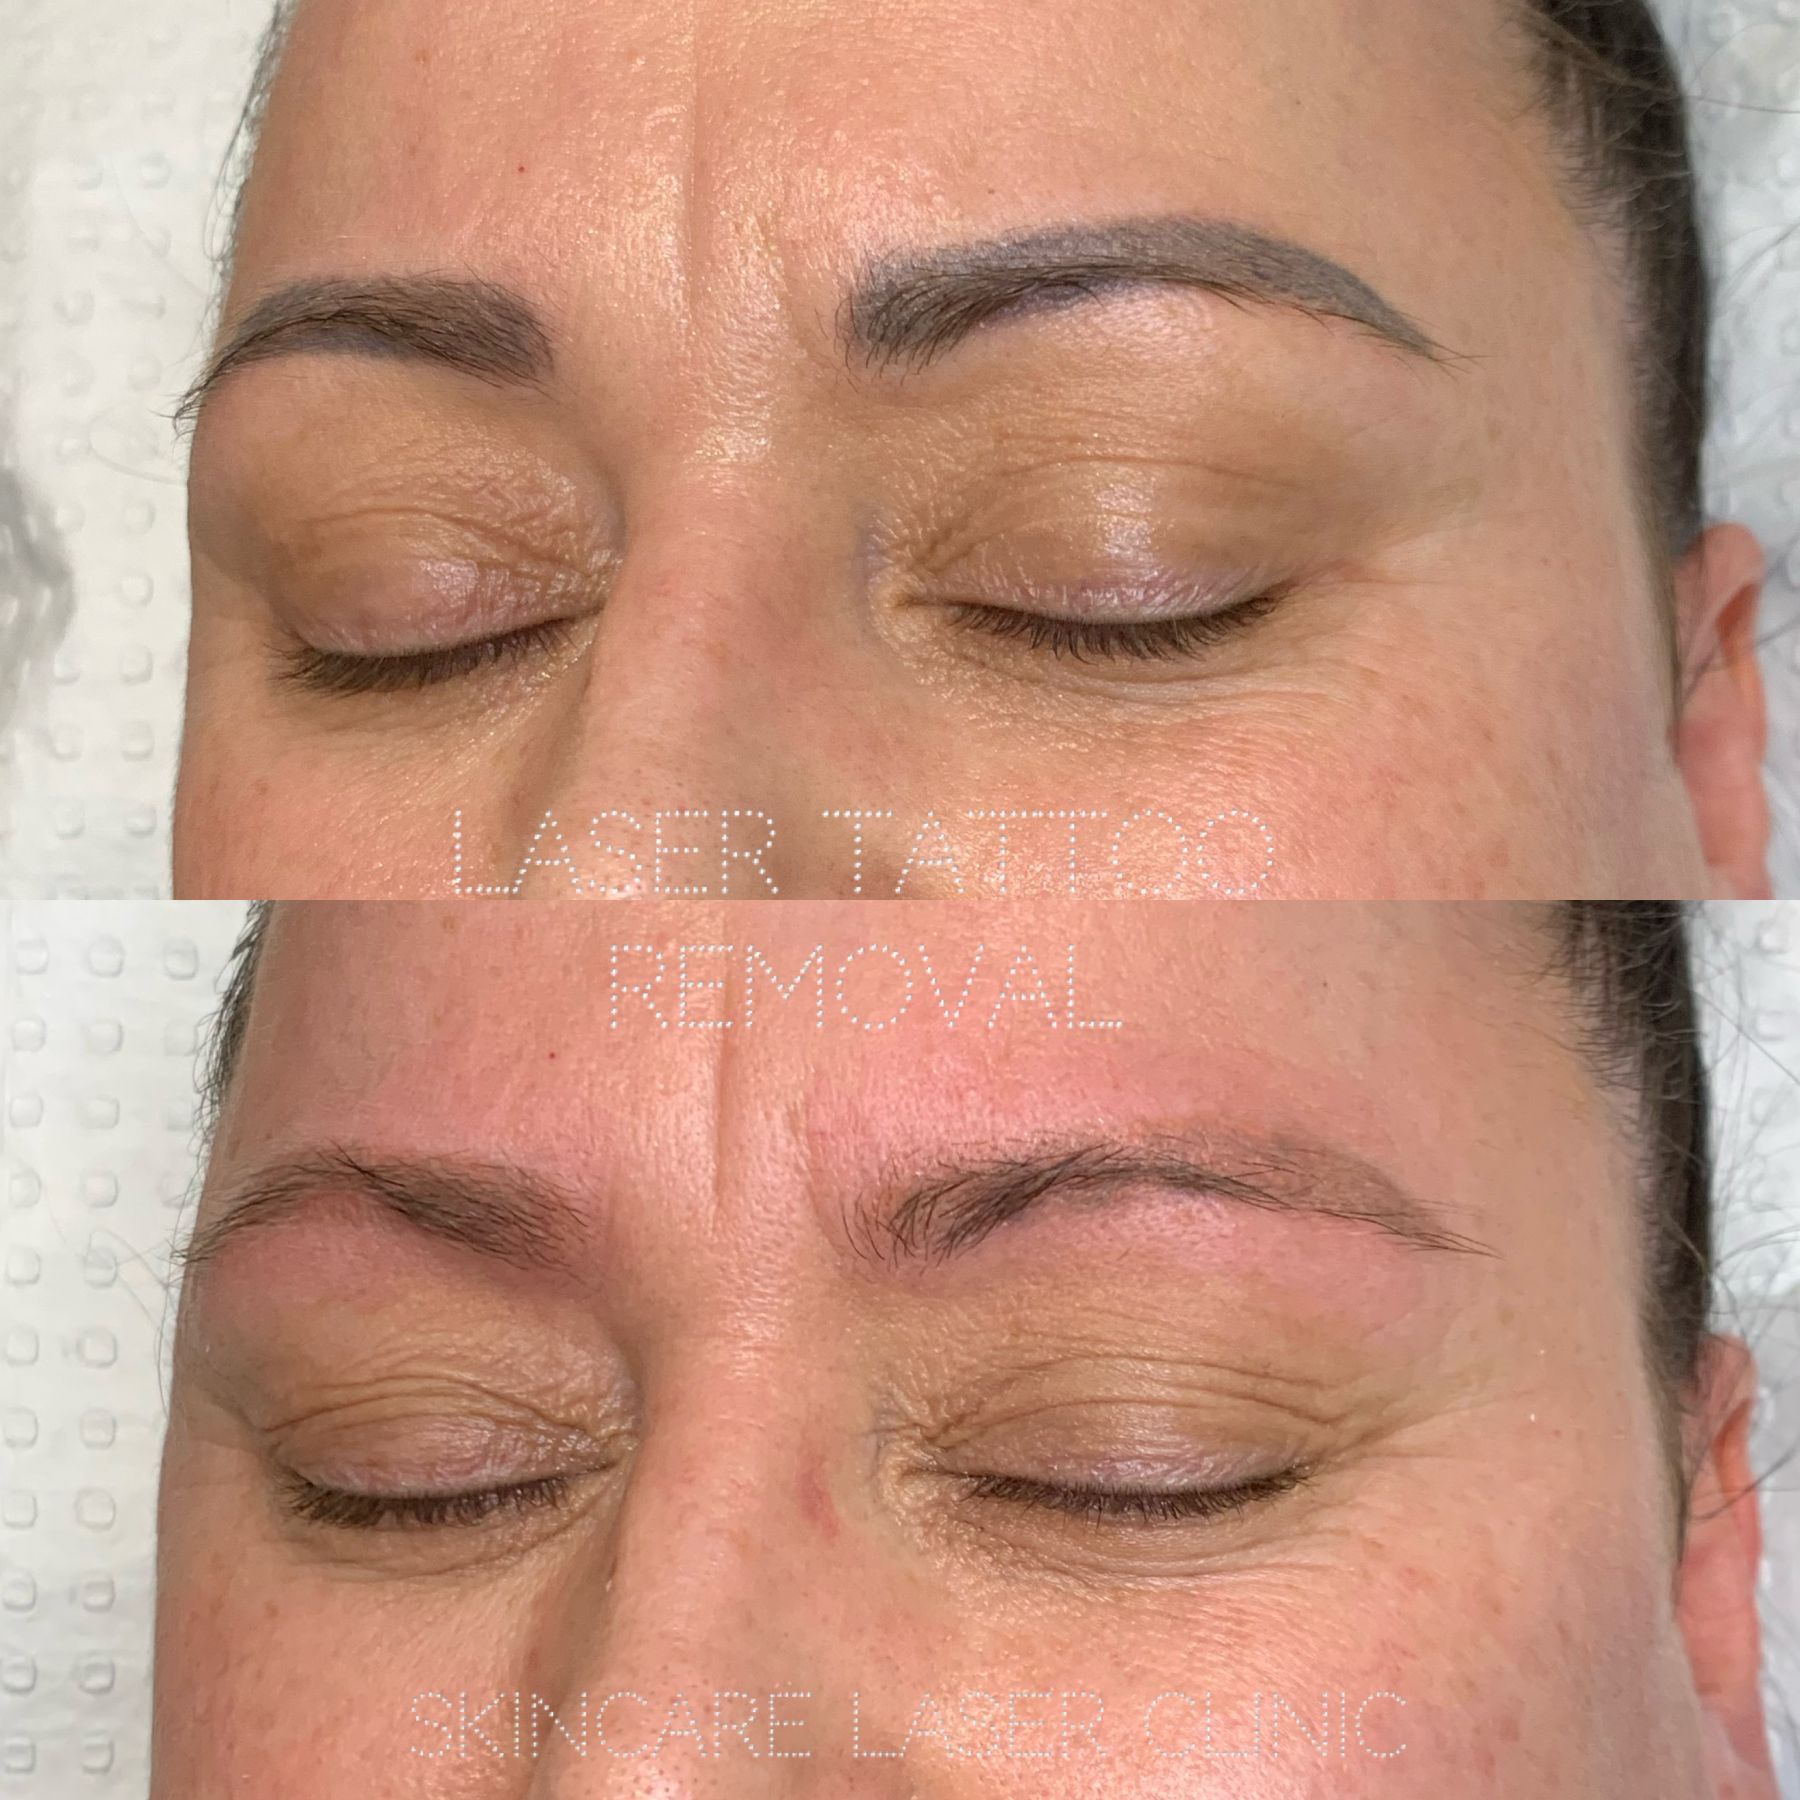 Laser Eyebrow Tattoo Removal Procedure Treatment with PicoWay Pulse Light  Clinic  YouTube